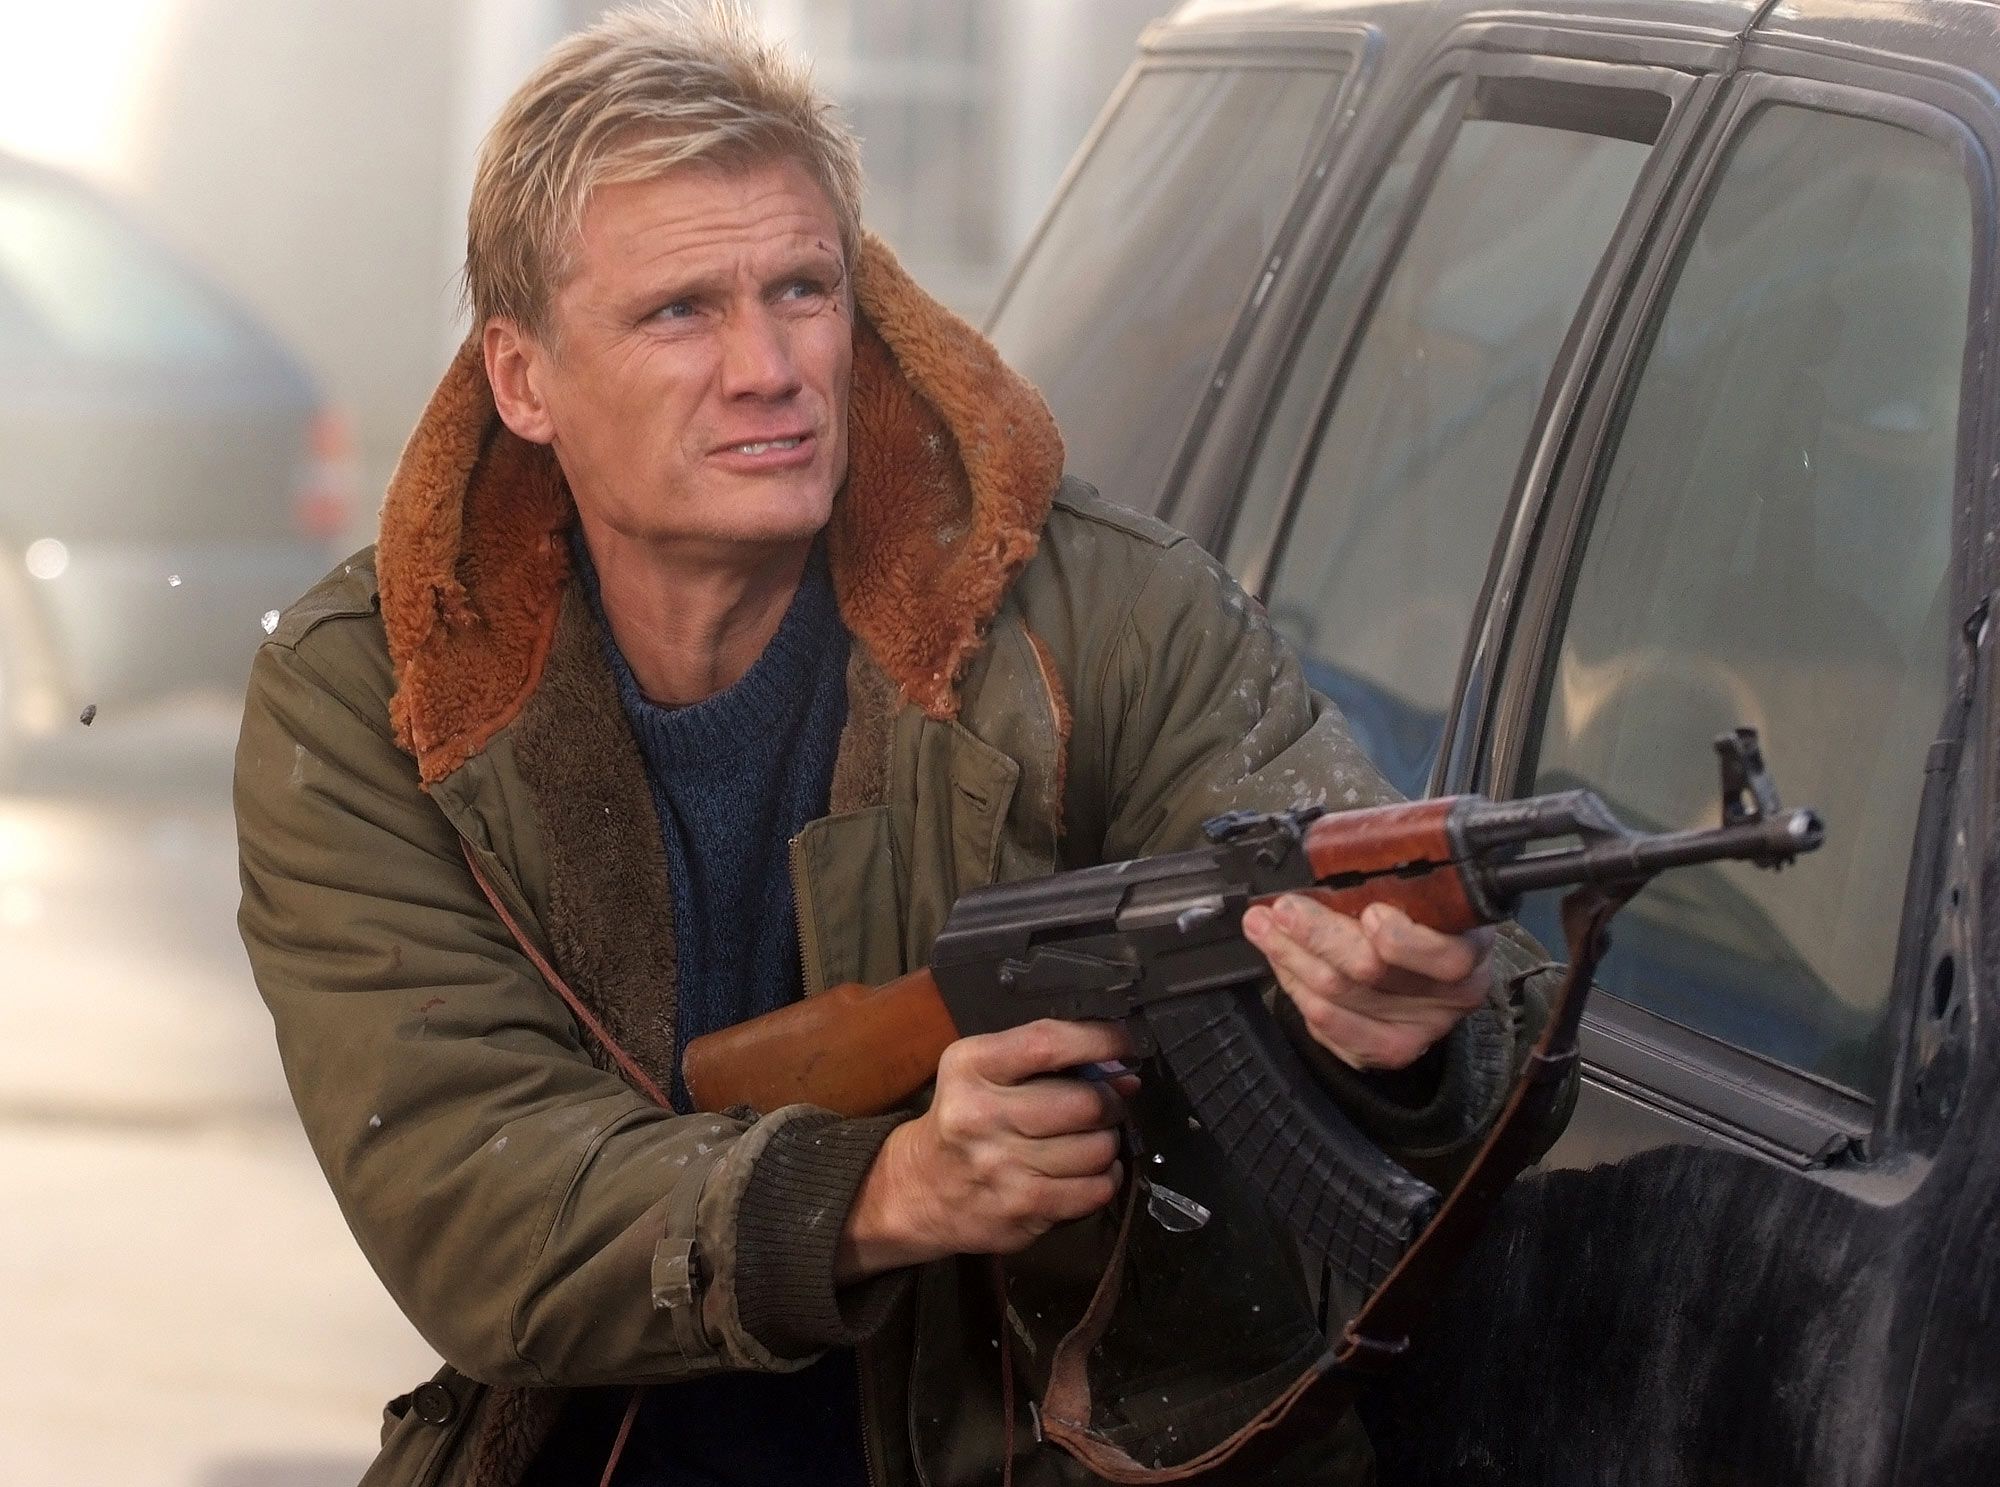 Dolph Lundgren Stars in Direct Contact